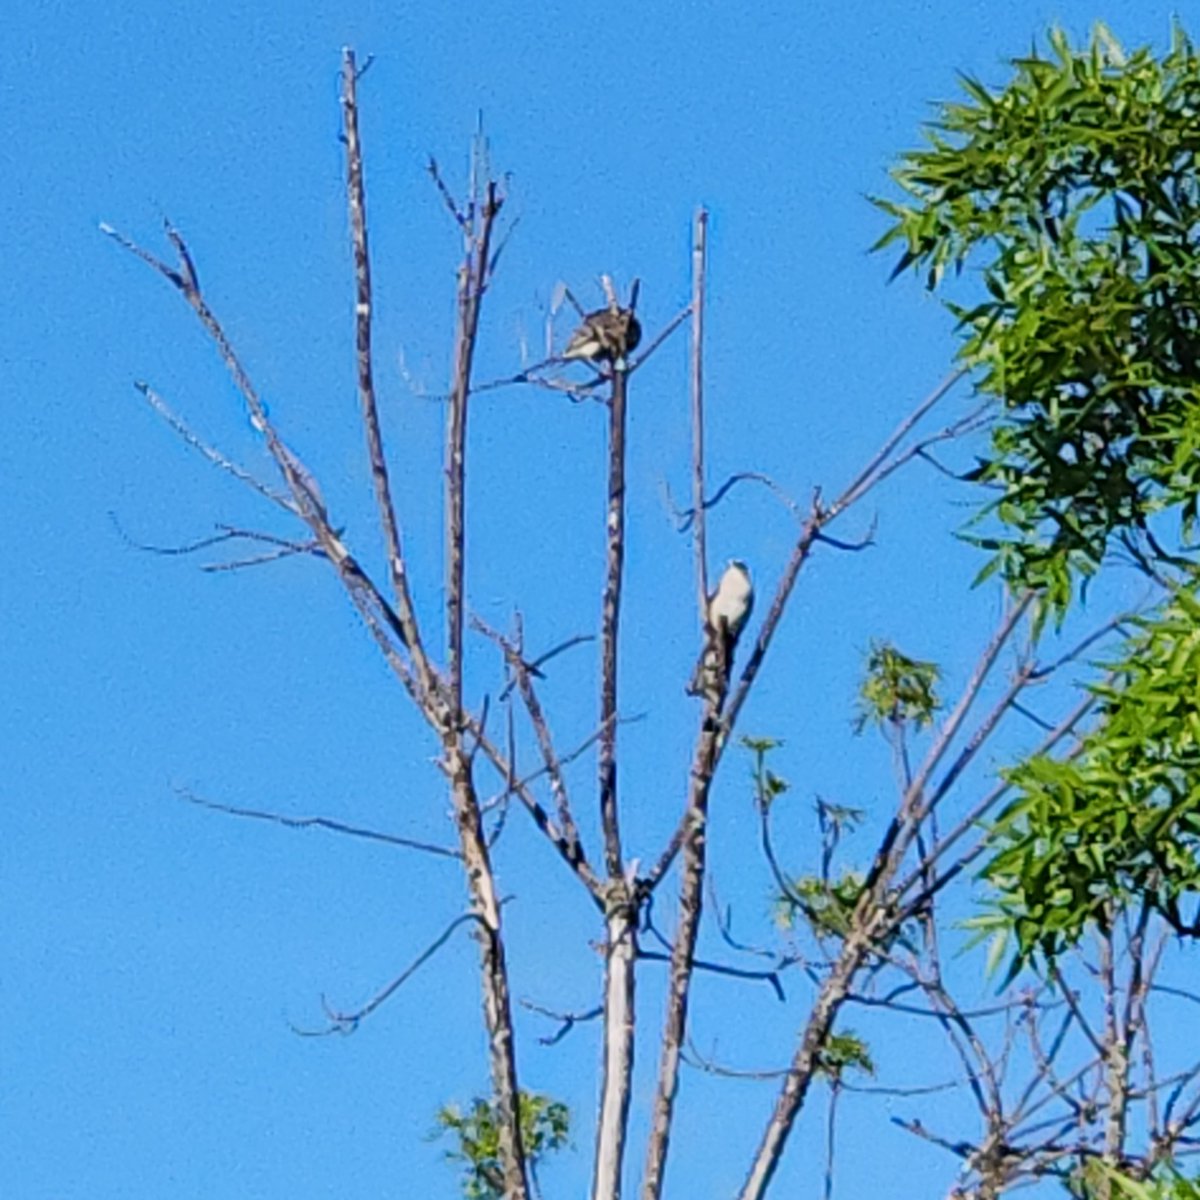 Mockingbird couple catching the last rays of the day
#NorCal